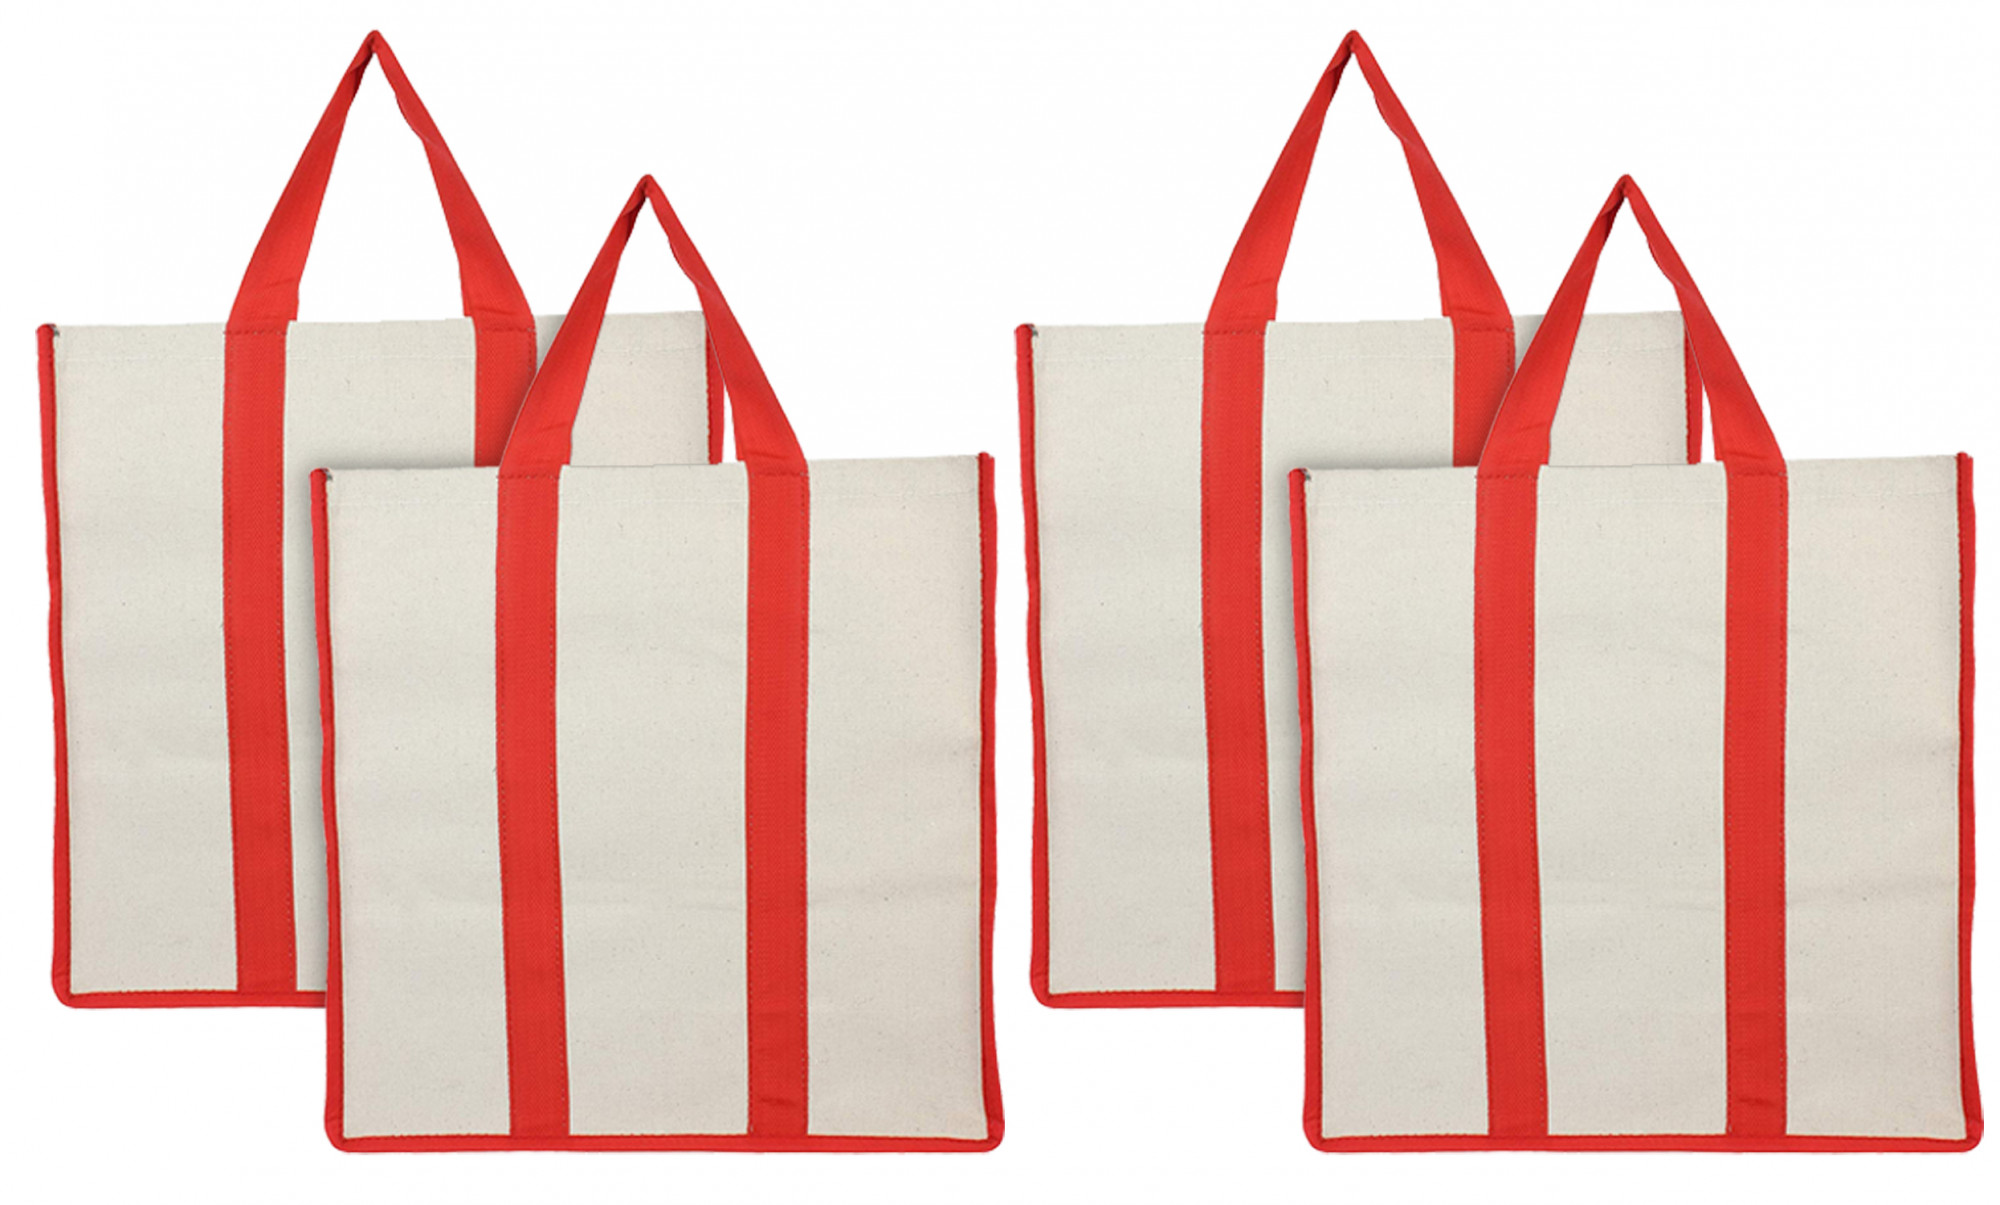 Kuber Industries Canvas Shopping Bags for Carry Milk Grocery Fruits Vegetable with Reinforced Handles jhola Bag (Cream & Red)